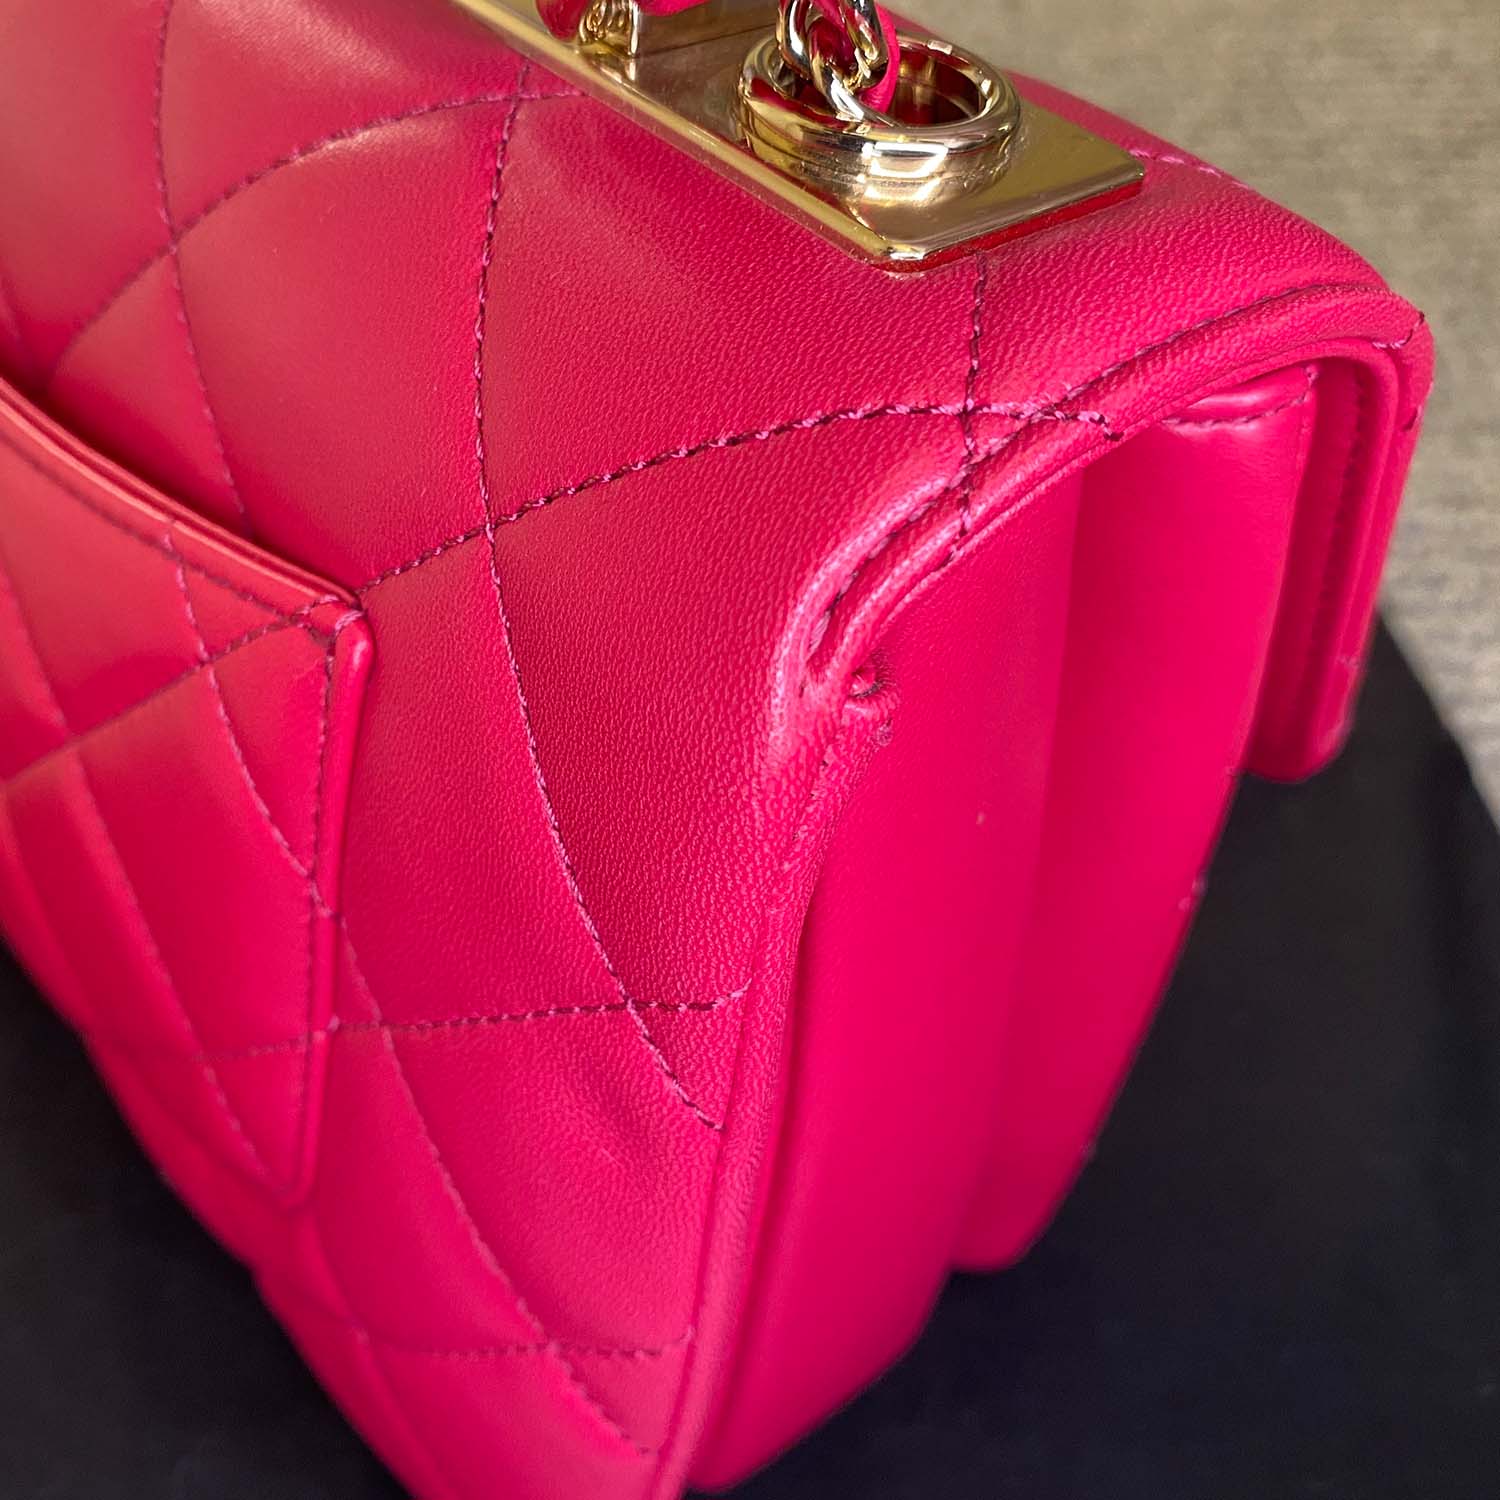 Trendy cc leather handbag Chanel Pink in Leather - 34568563